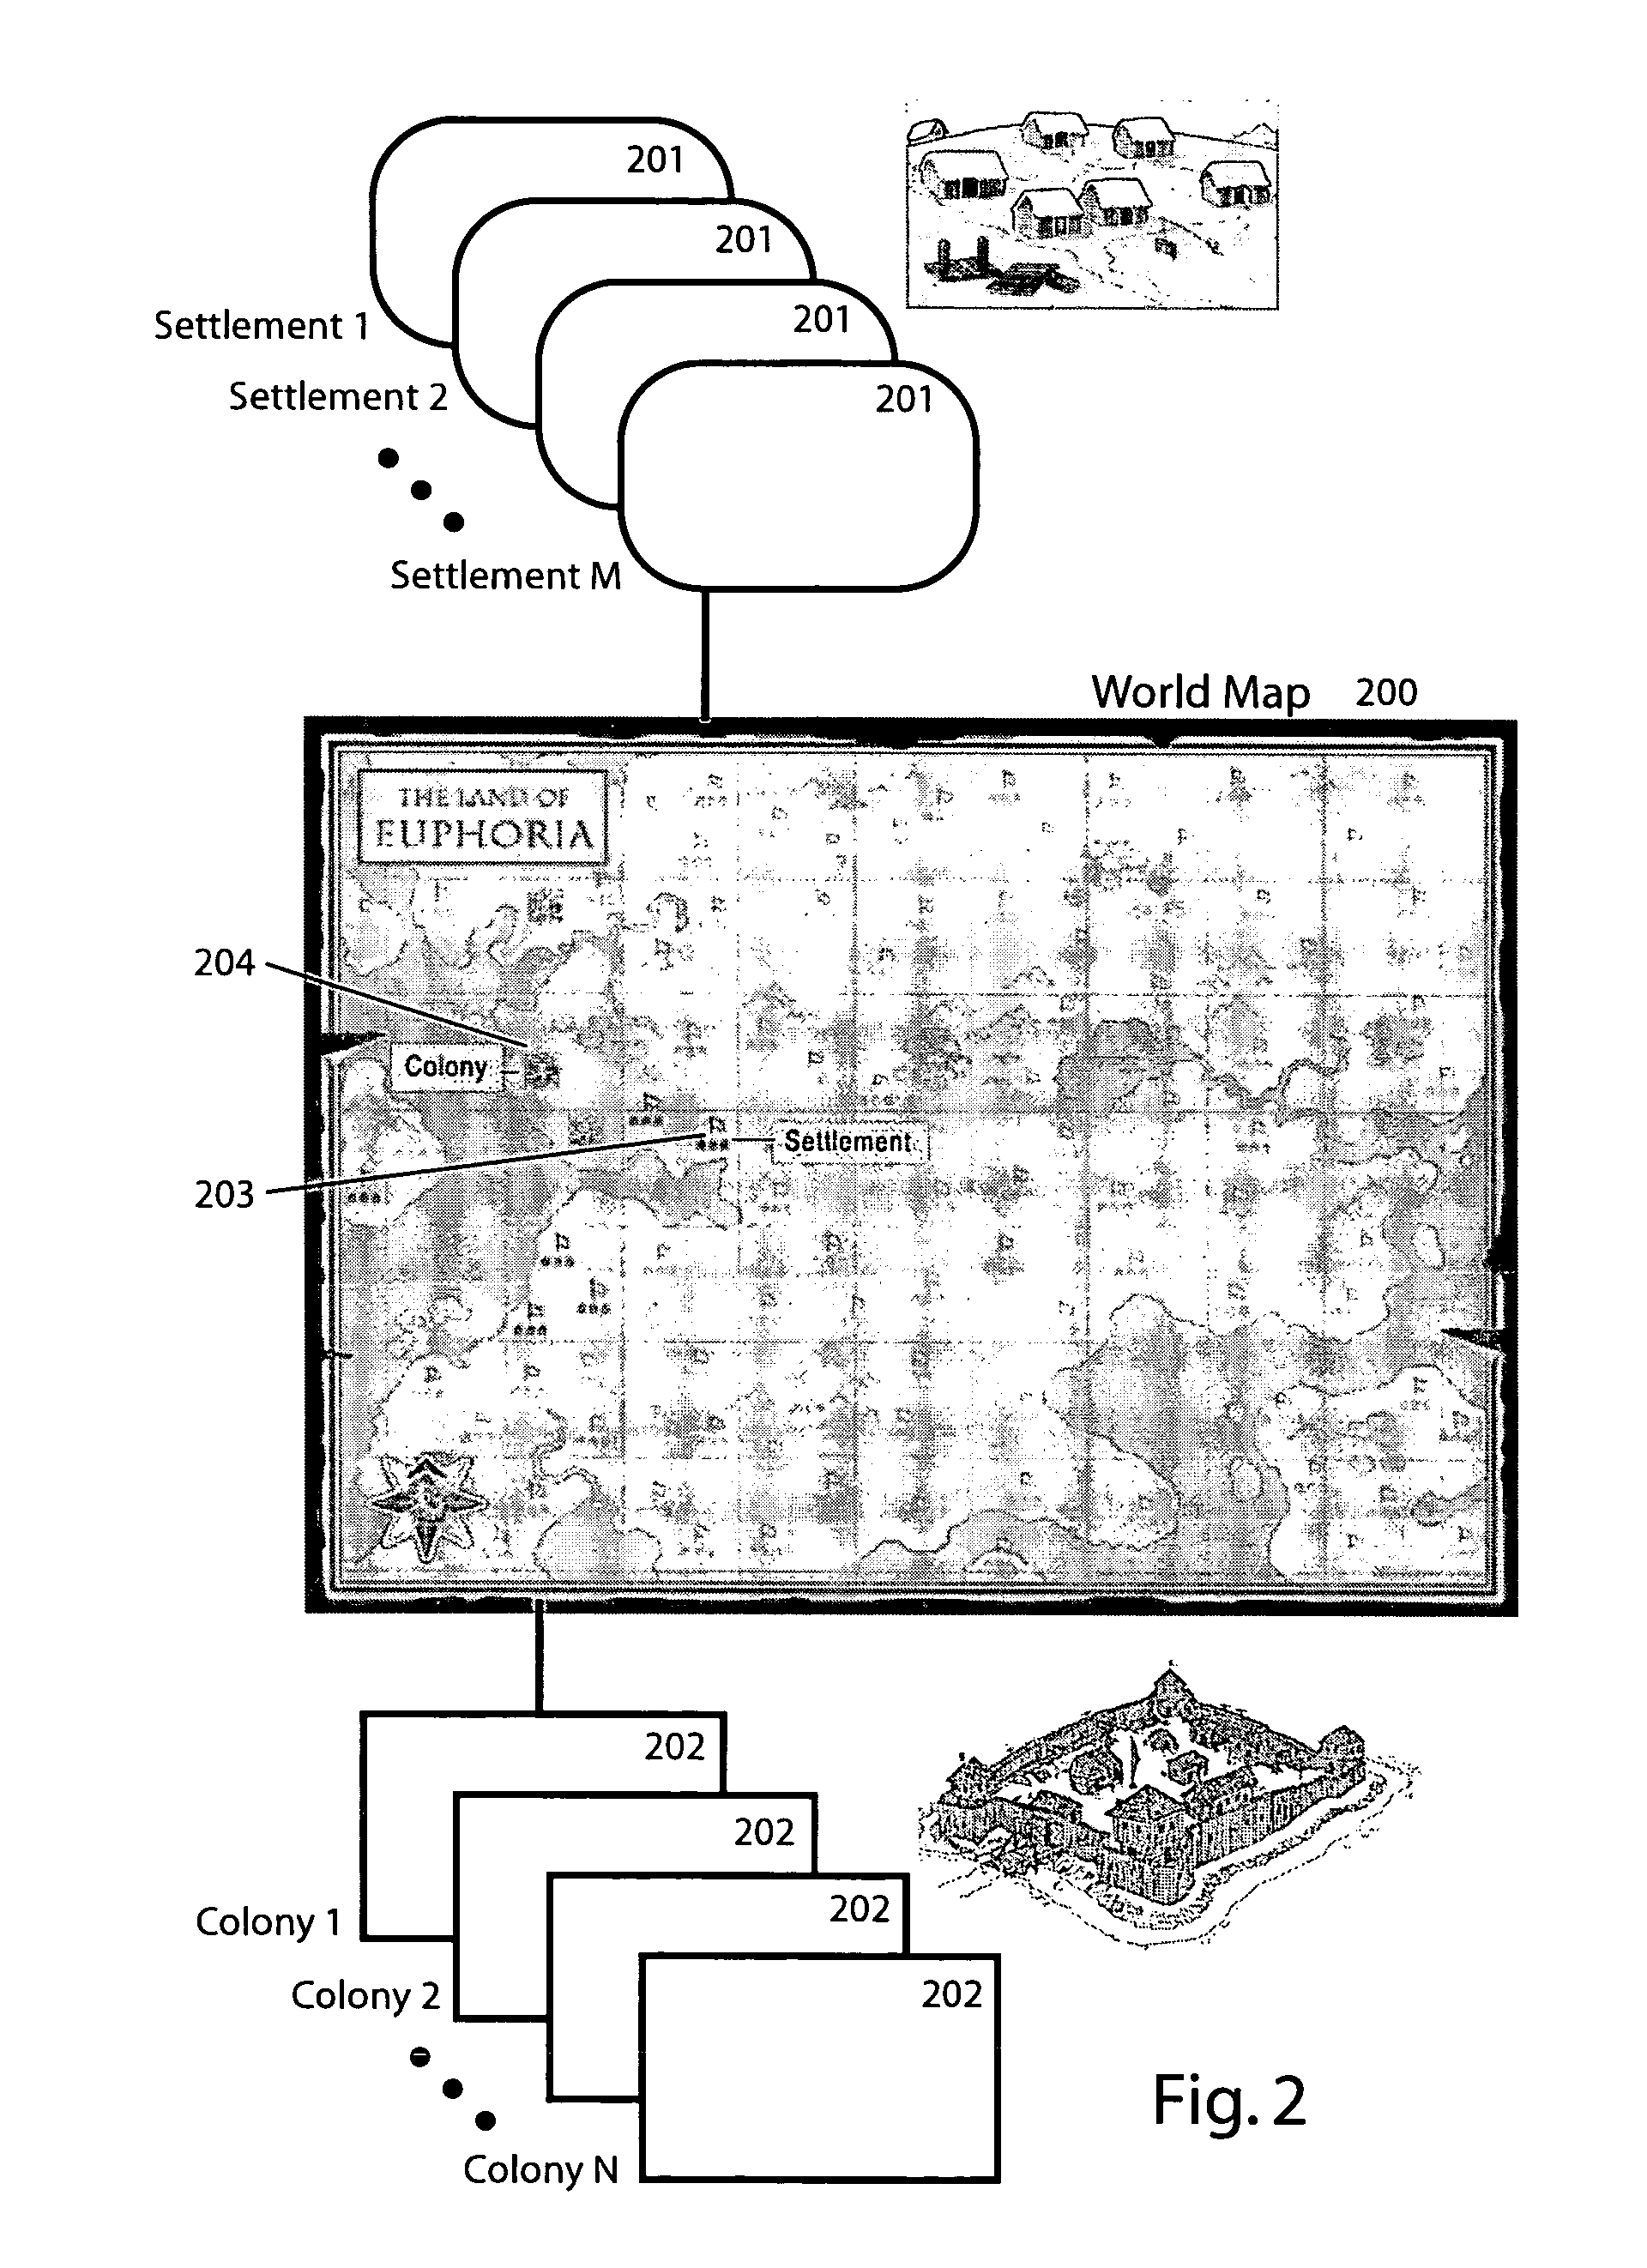 Self-organizing turn base games and social activities on a computer network